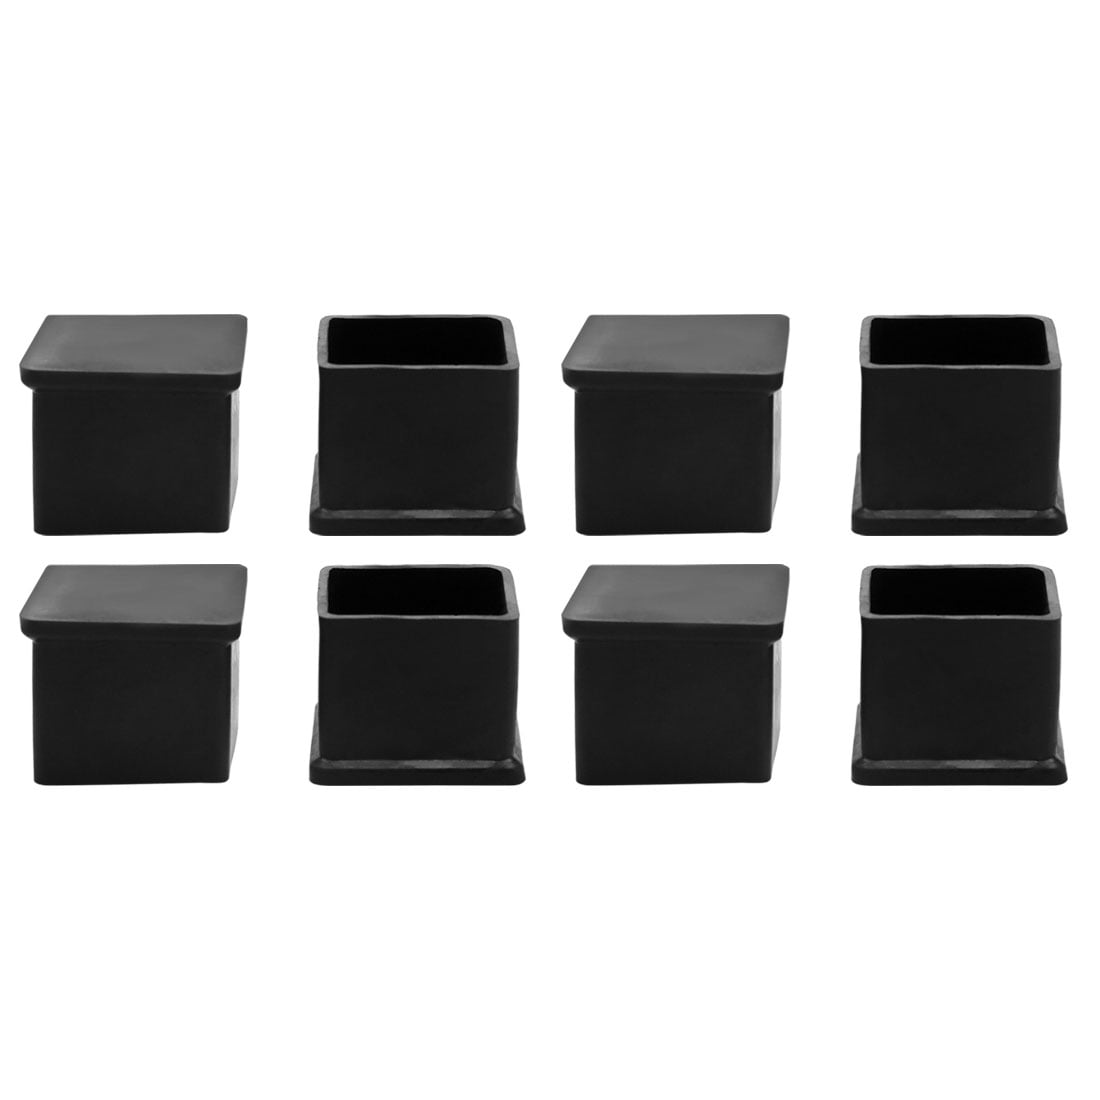 Details about   Feedback Pro Foot Square Rubber Cap Black 